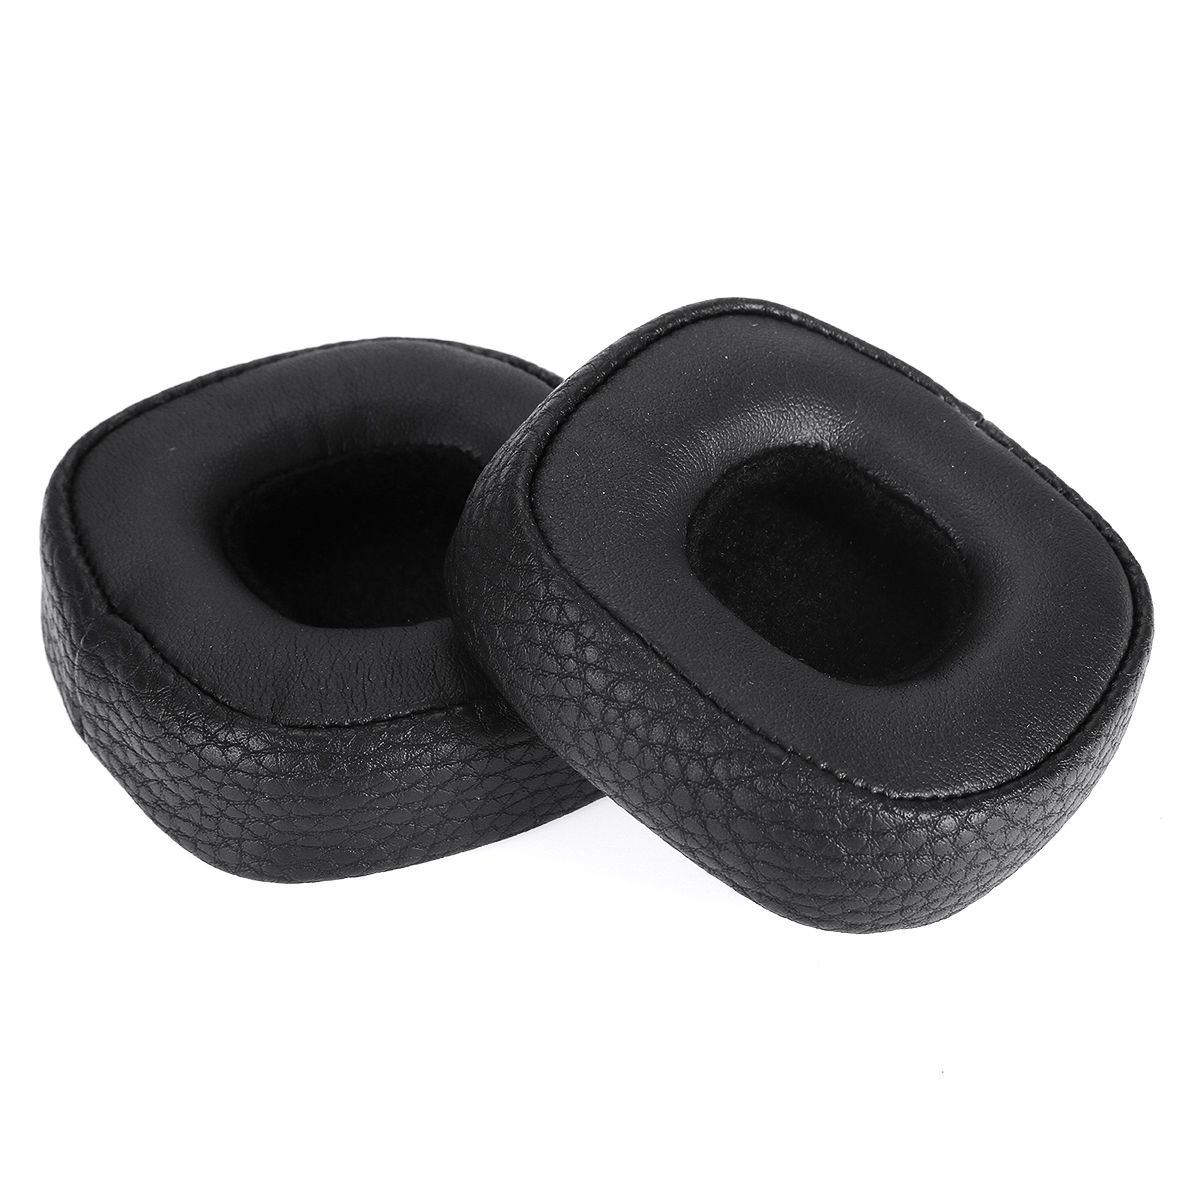 2Pcs-Replacement-Ear-Pads-Protector-for-MID-ANC-for-Major-I-II-III-Headphone-Standard-Comfortable-So-1590915